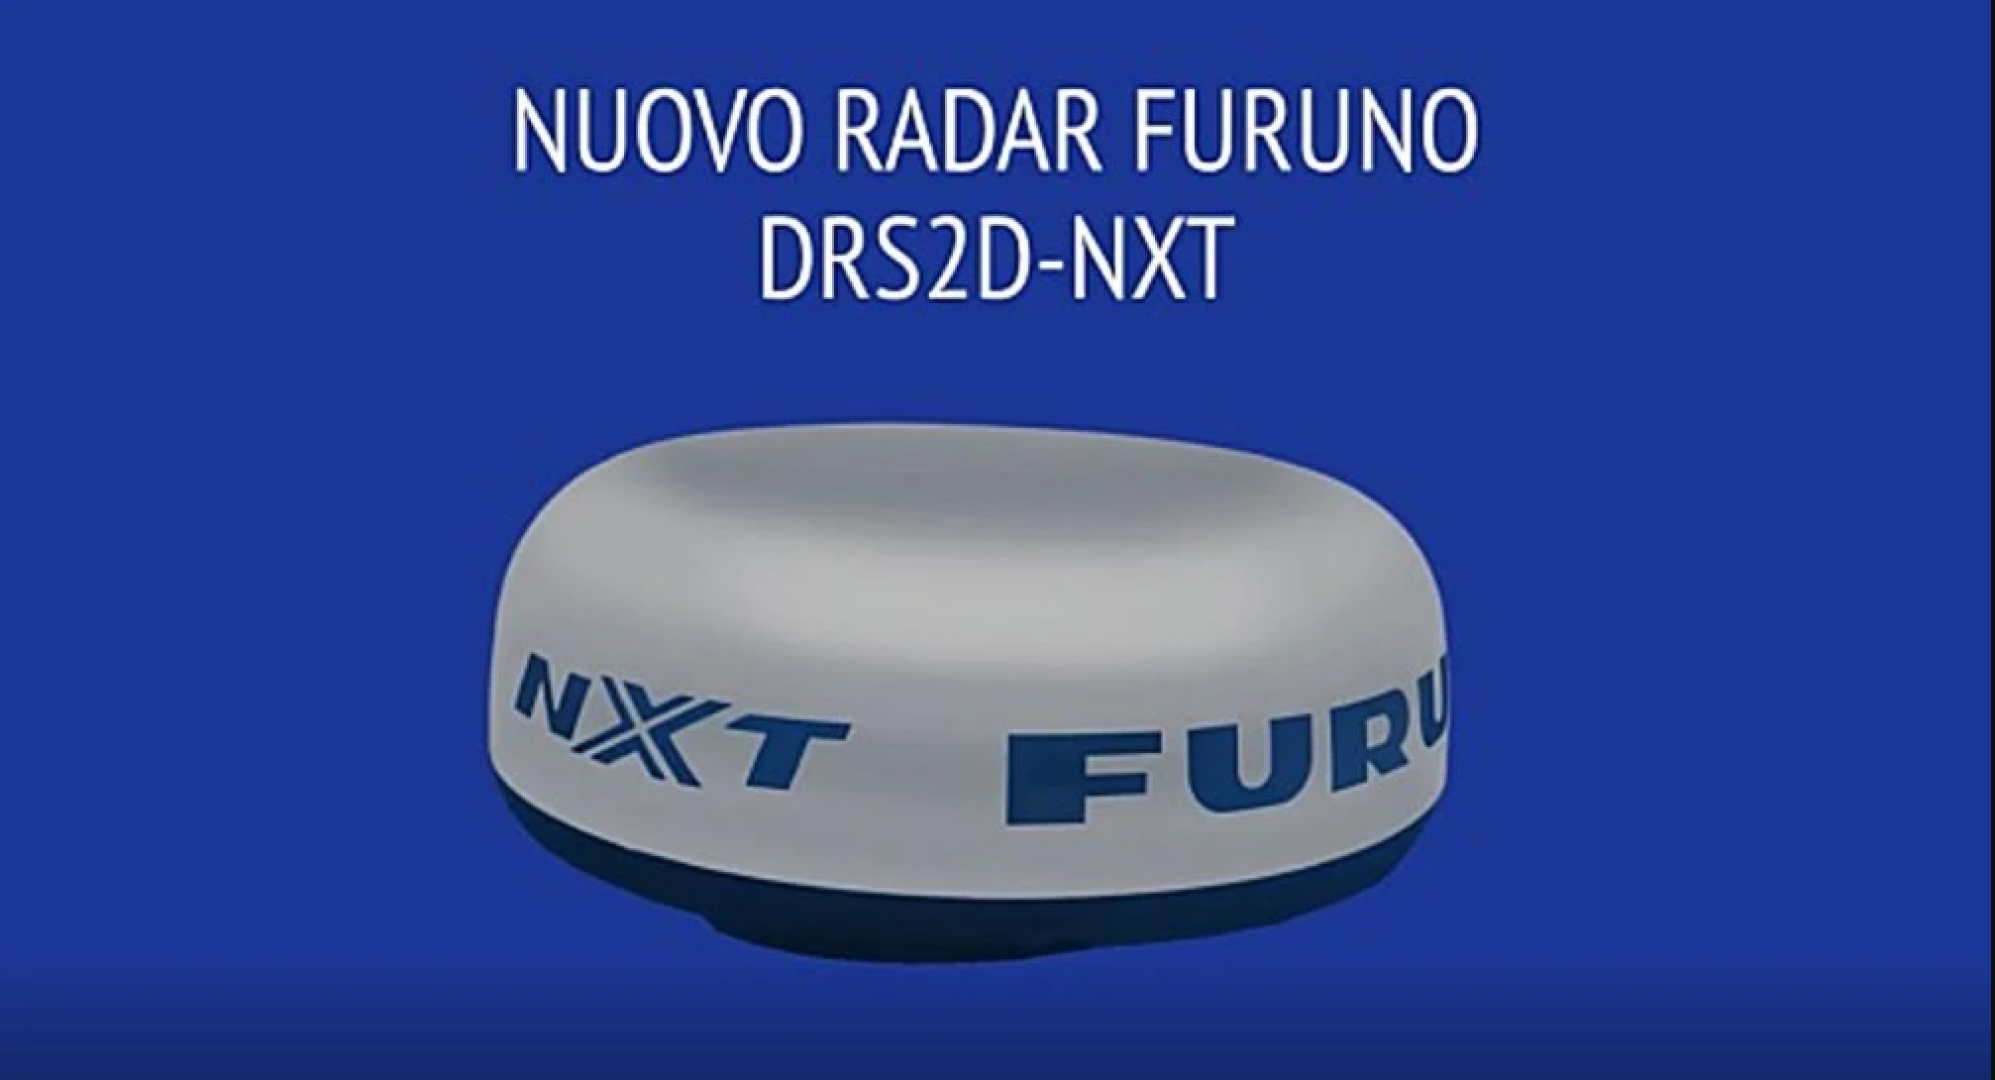 Furuno DRS2DNXT, radar functionality in a small and compact model